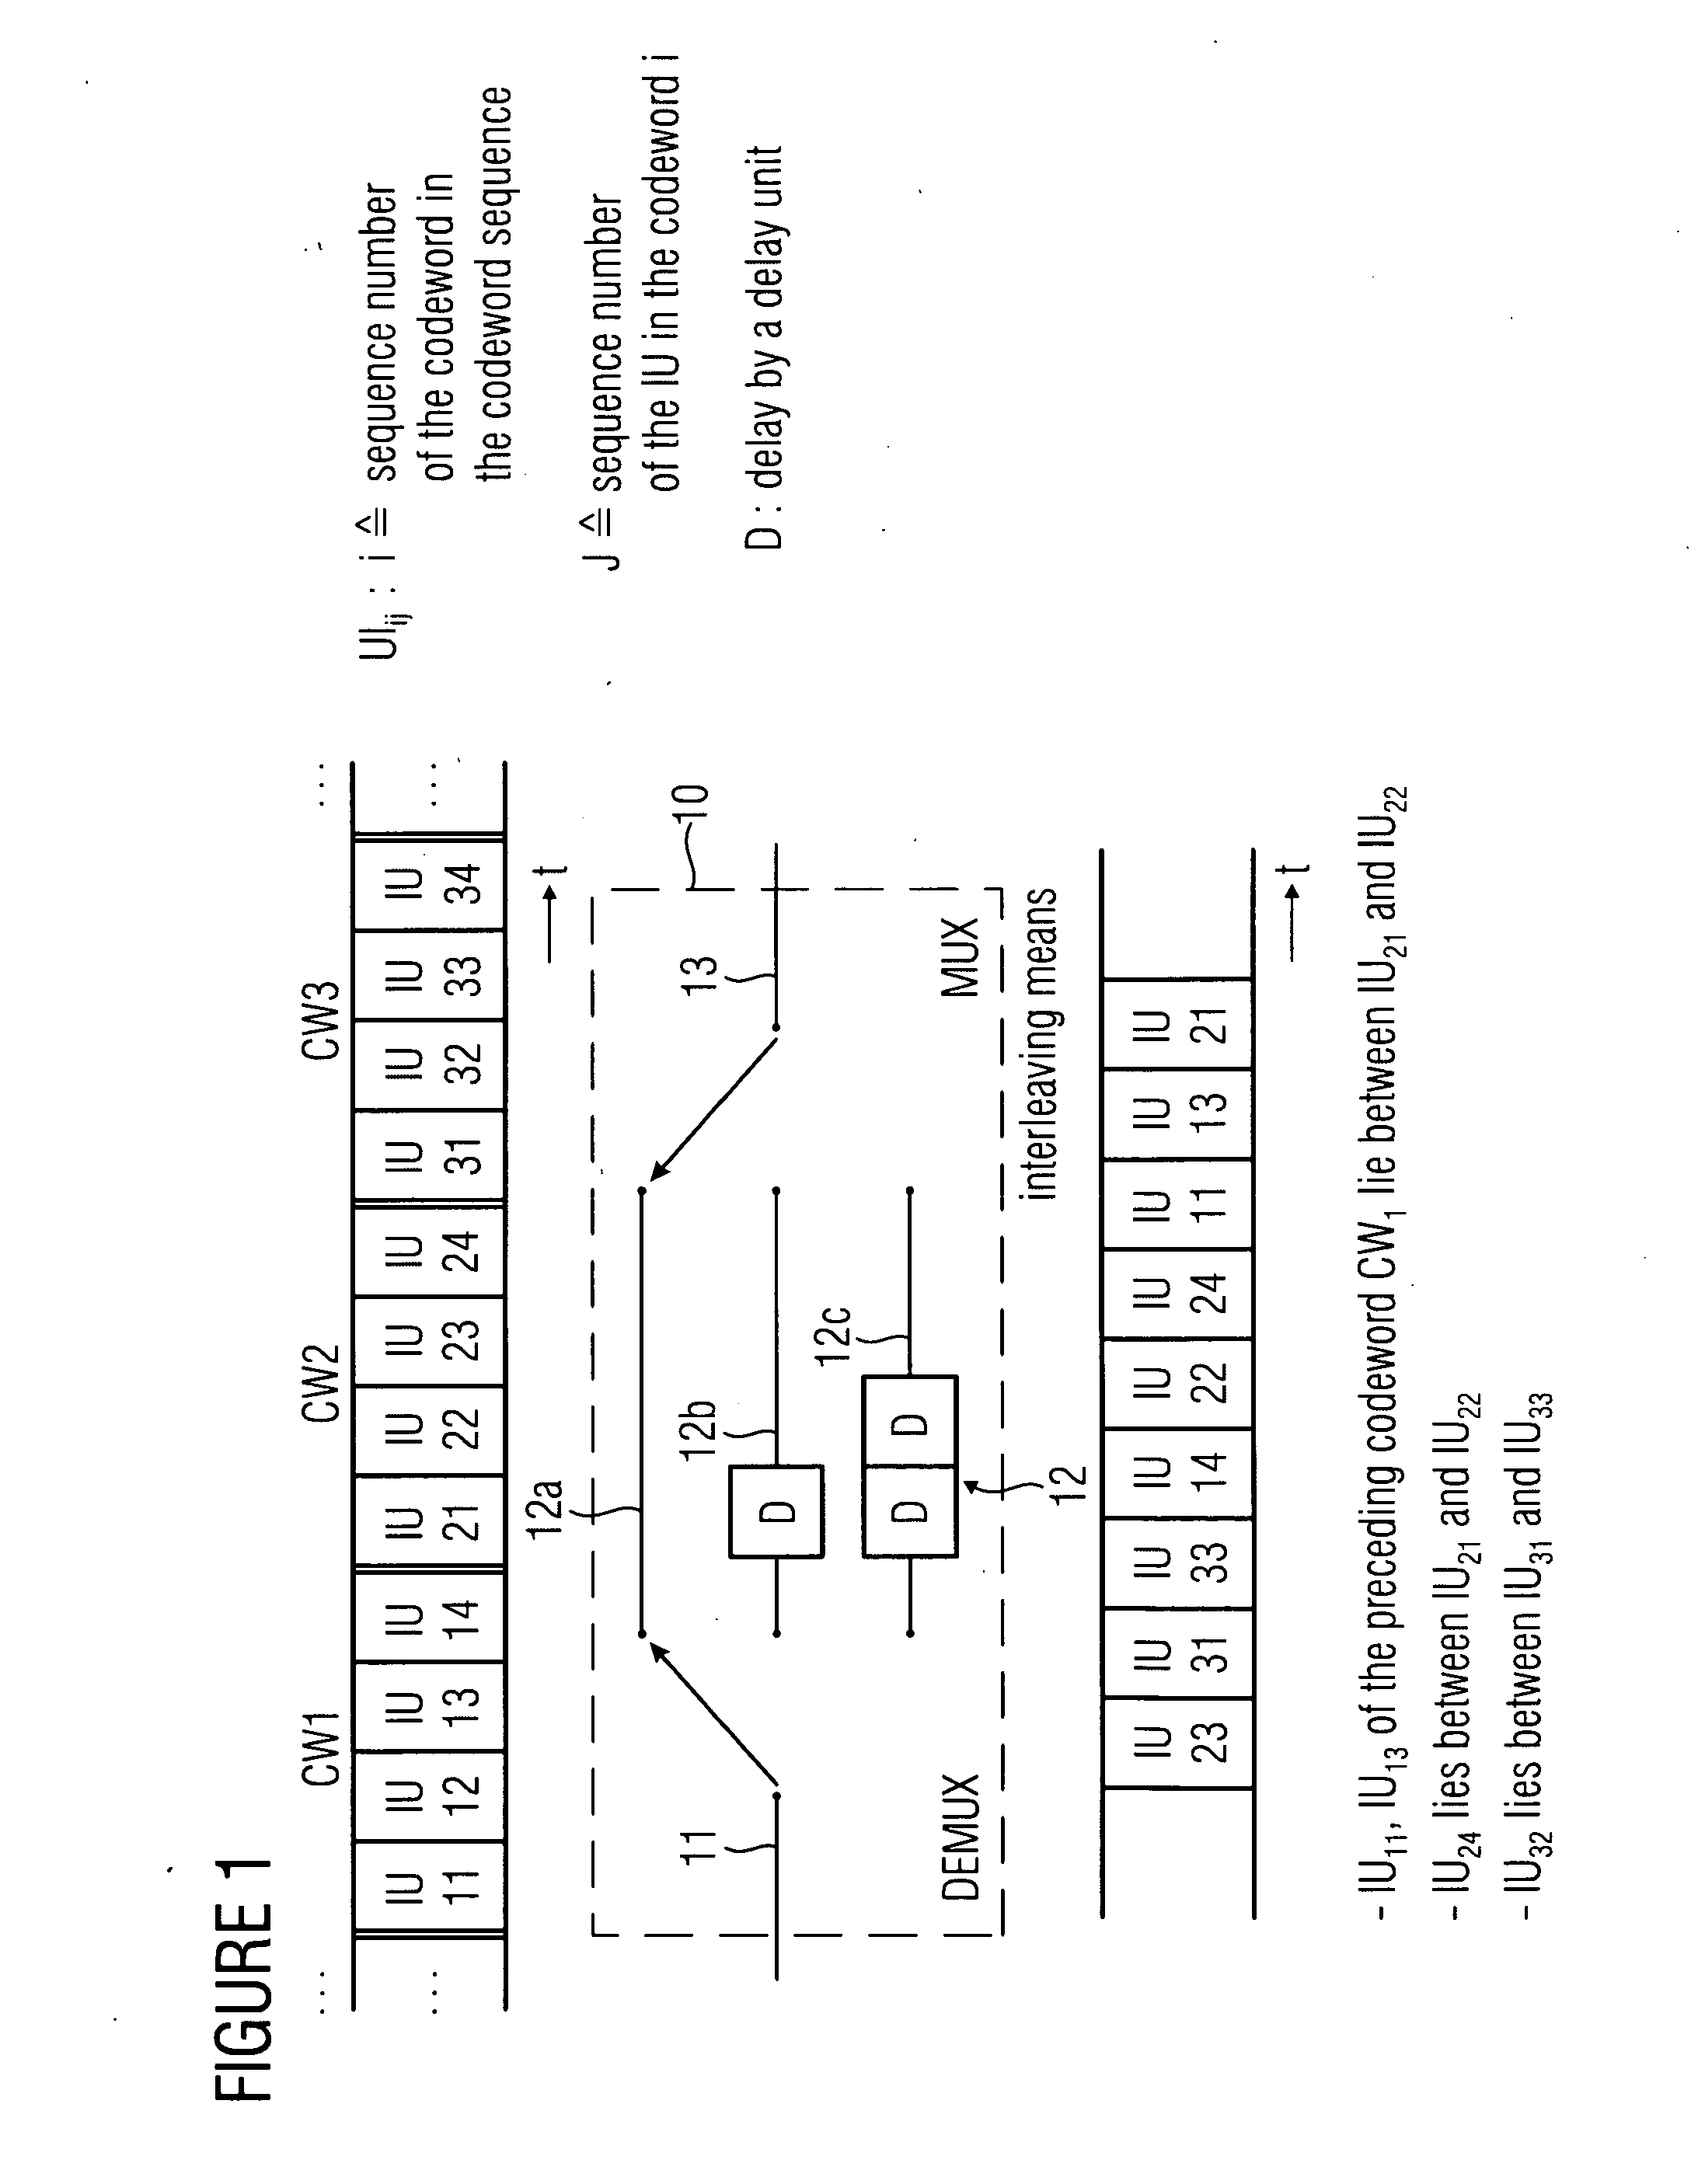 Interleaver apparatus and receiver for a signal generated by the interleaver apparatus